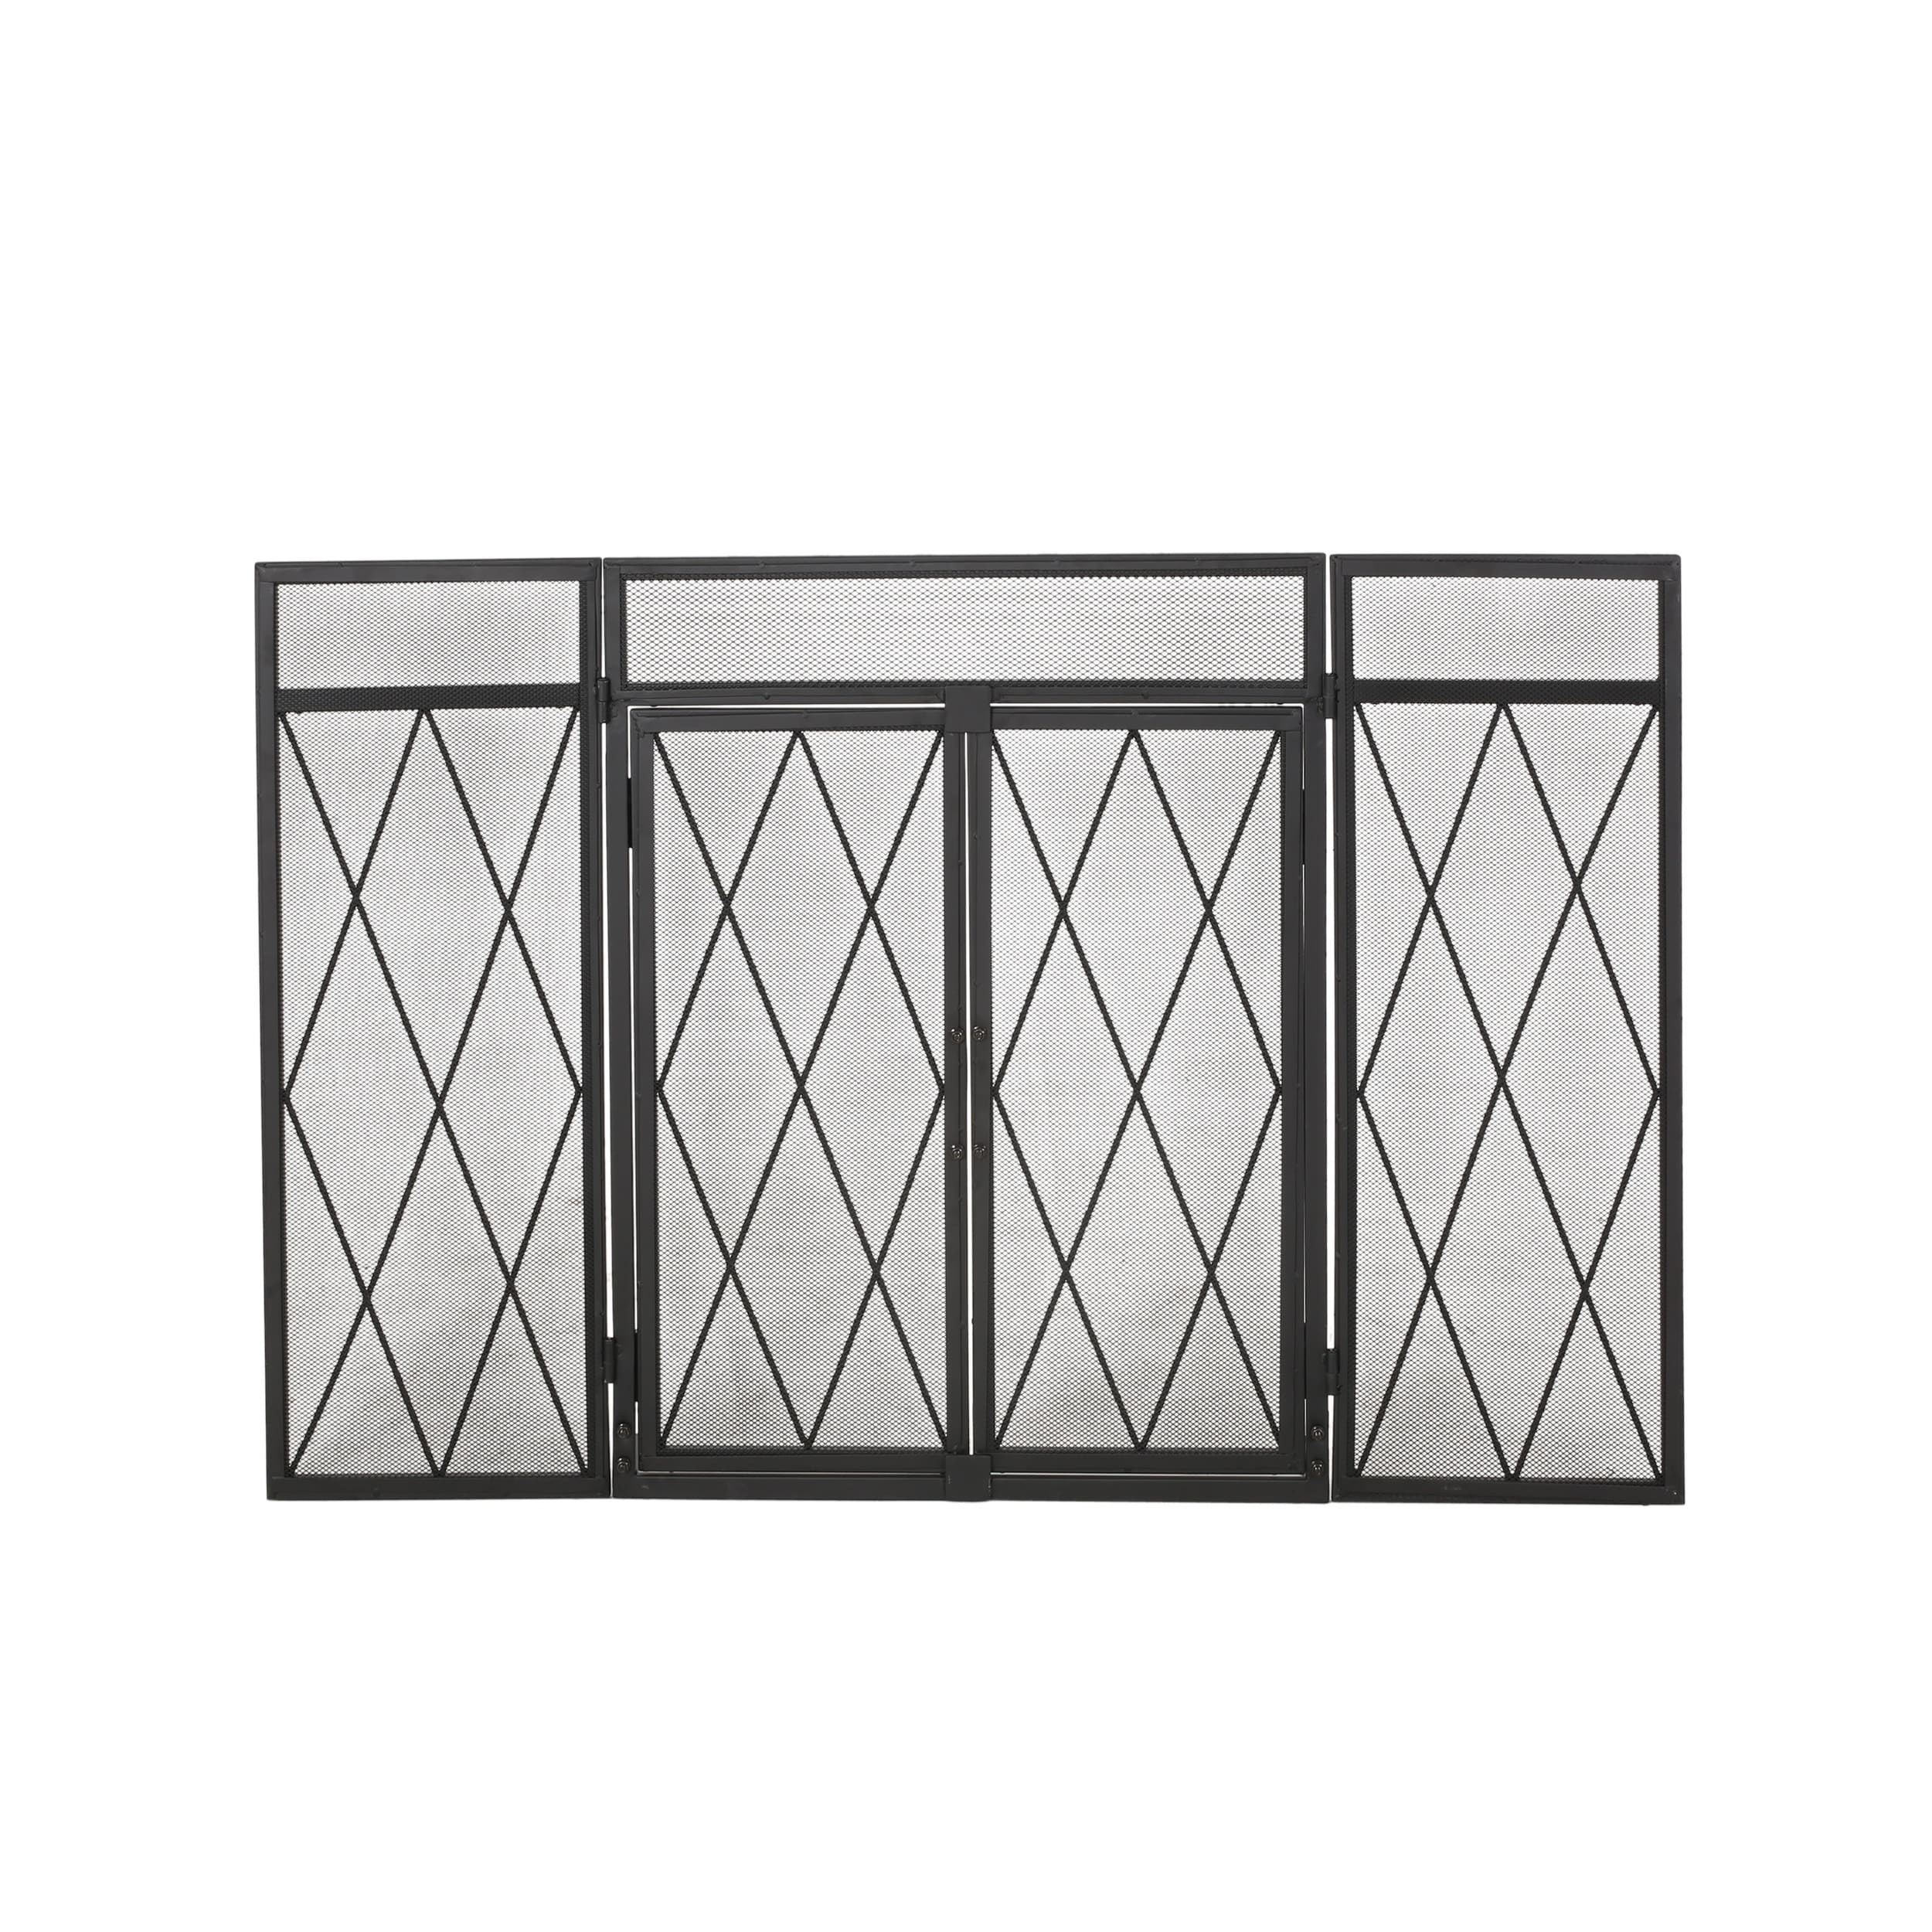 Christopher Knight Home Chelsey Panelled Iron Fireplace Screen, Gold - 1